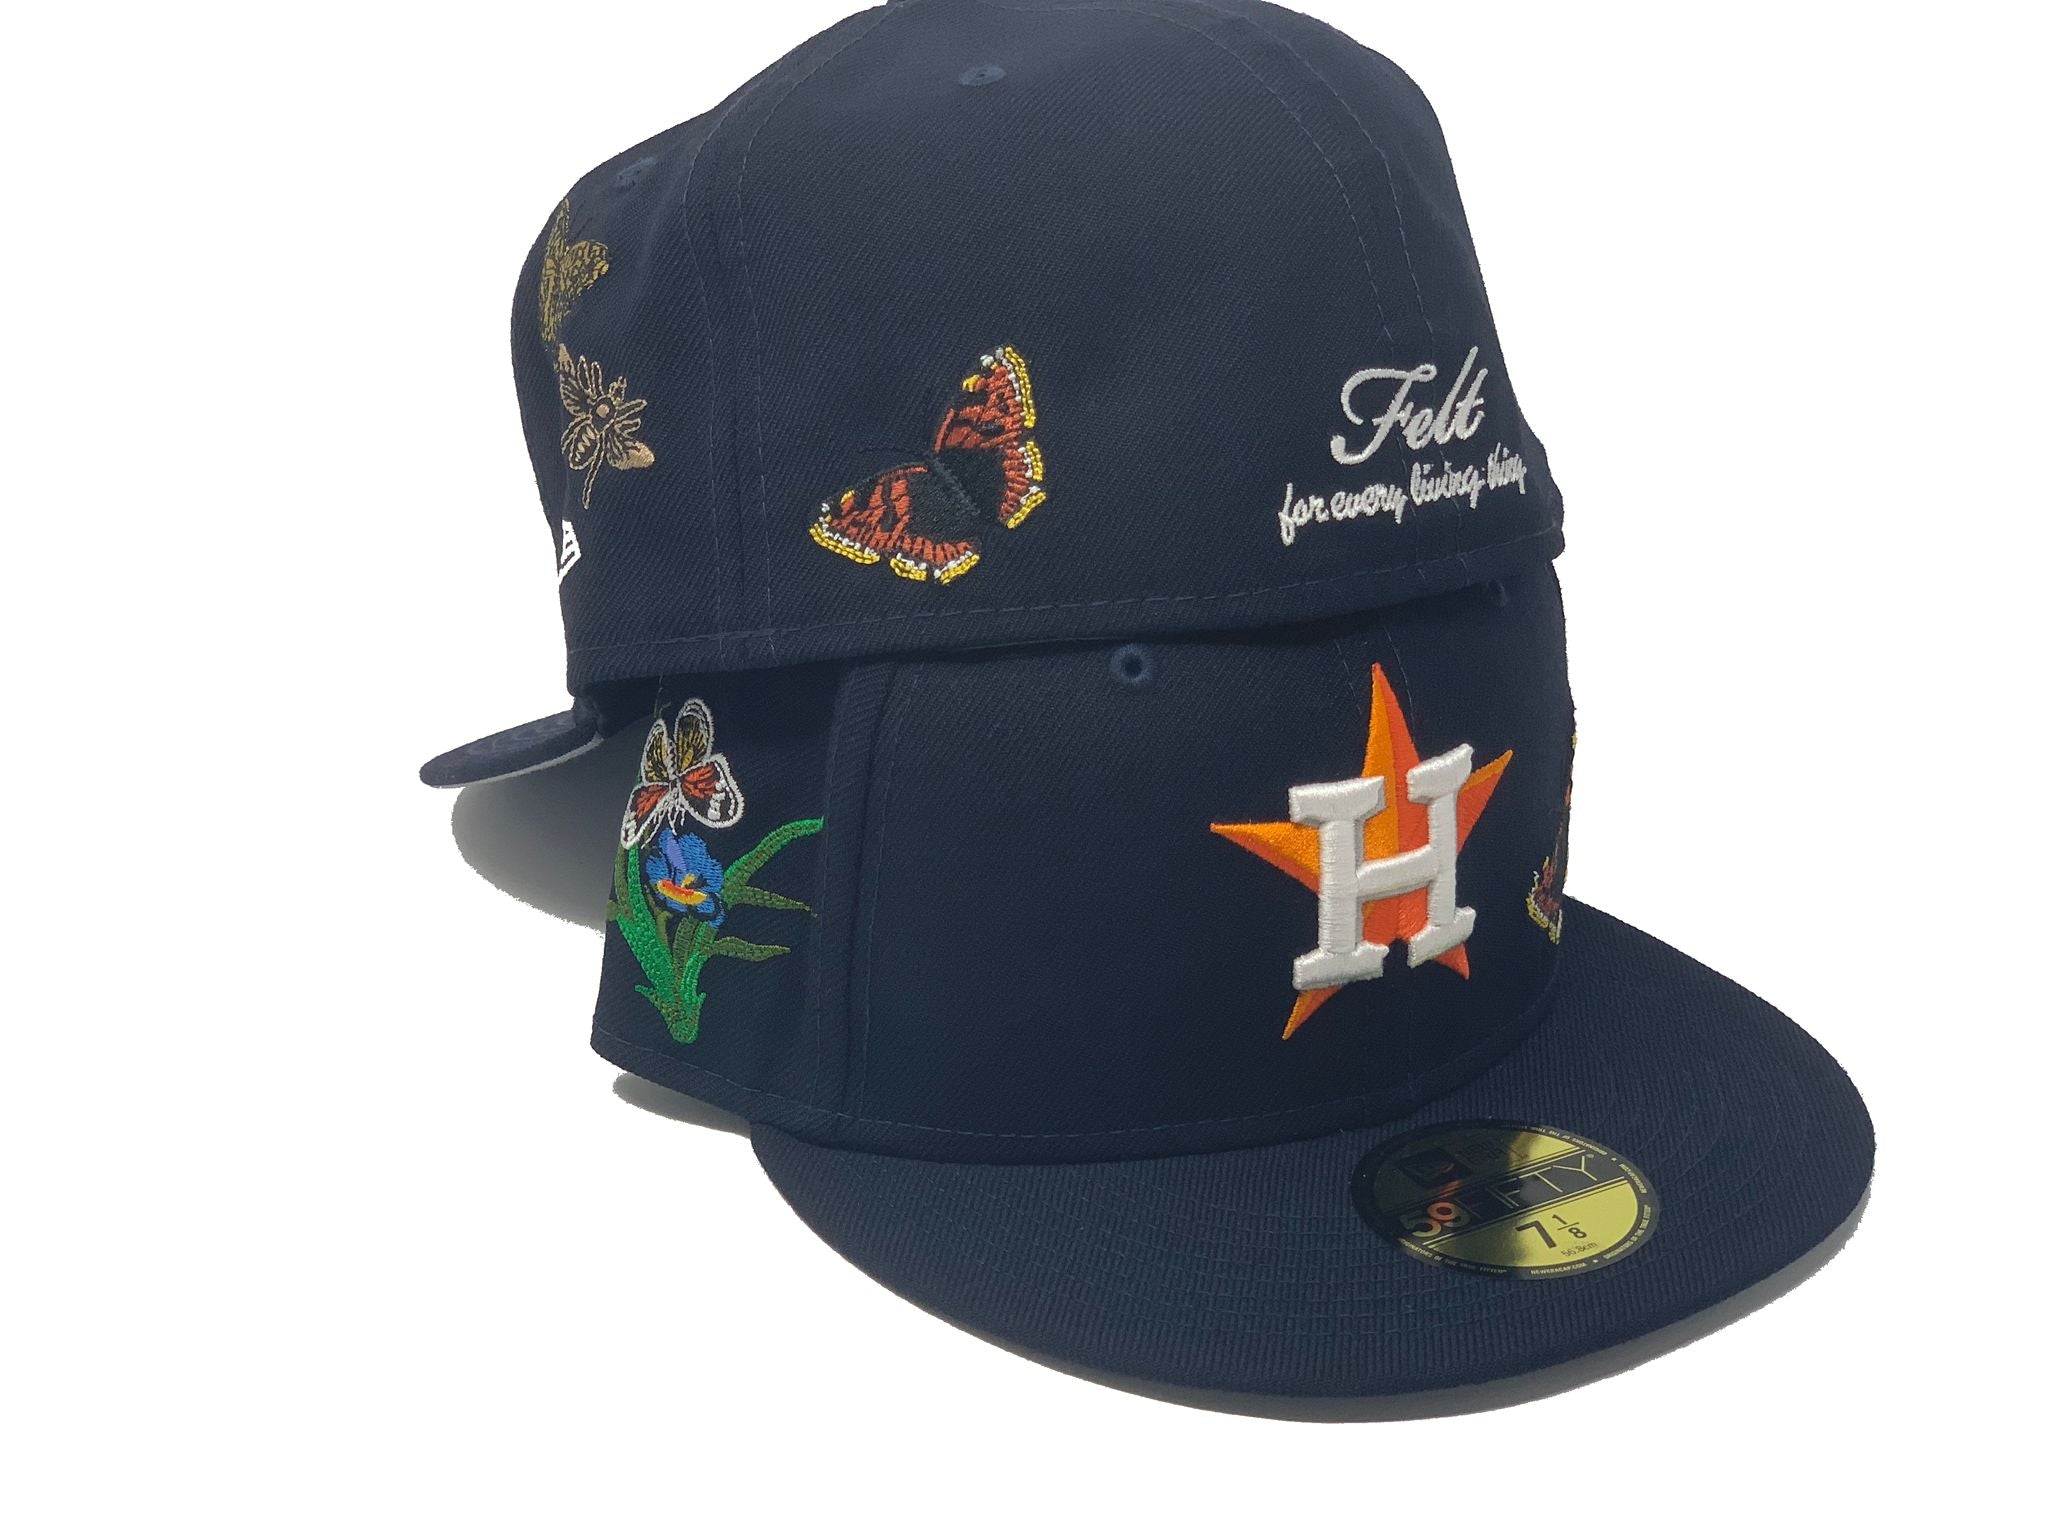 Lids Houston Astros New Era Infant My First 9FIFTY Hat - Navy